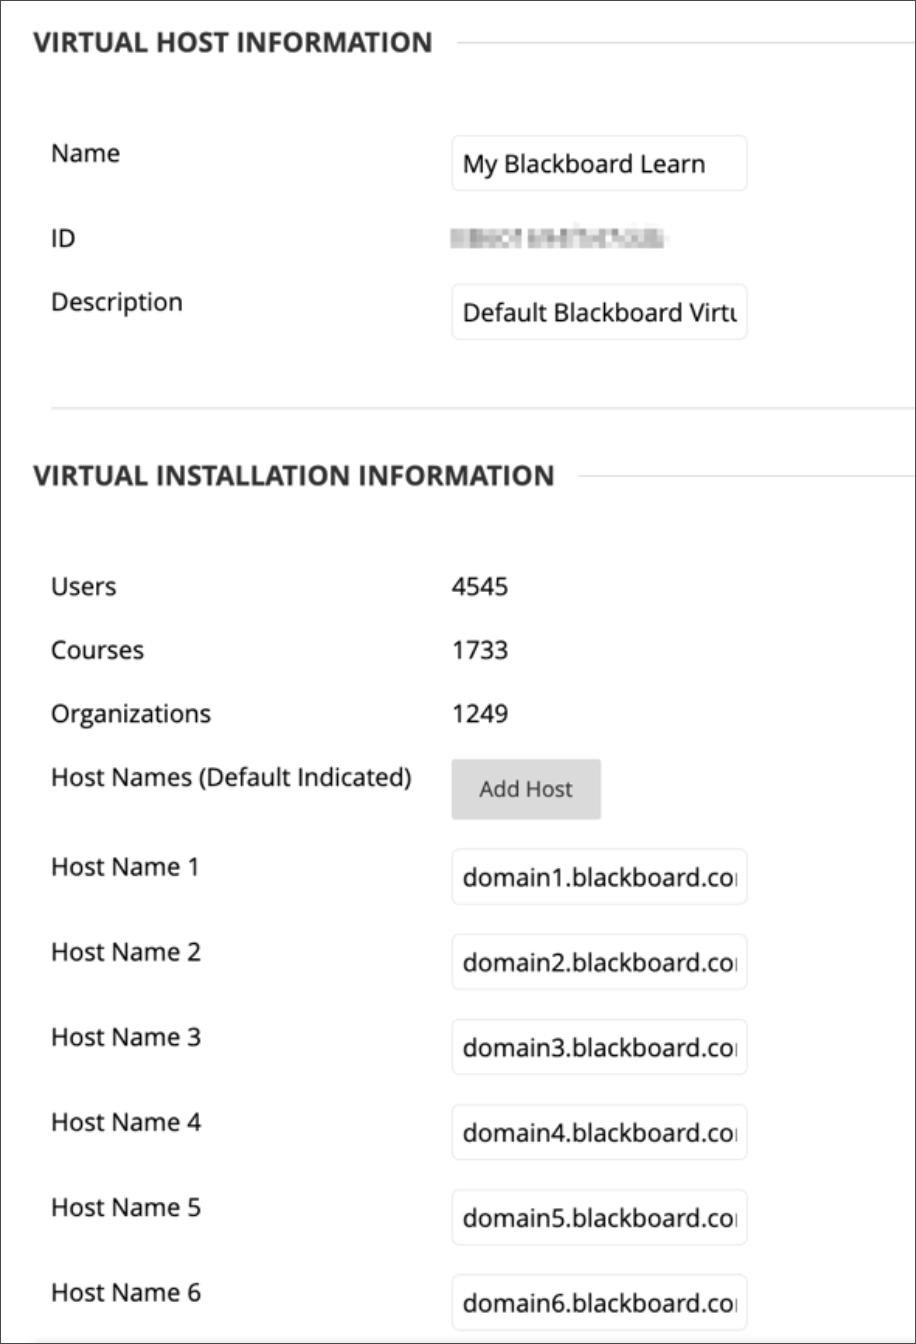 he hostname configuration page allows administrators to register all domains used to access the Learn application